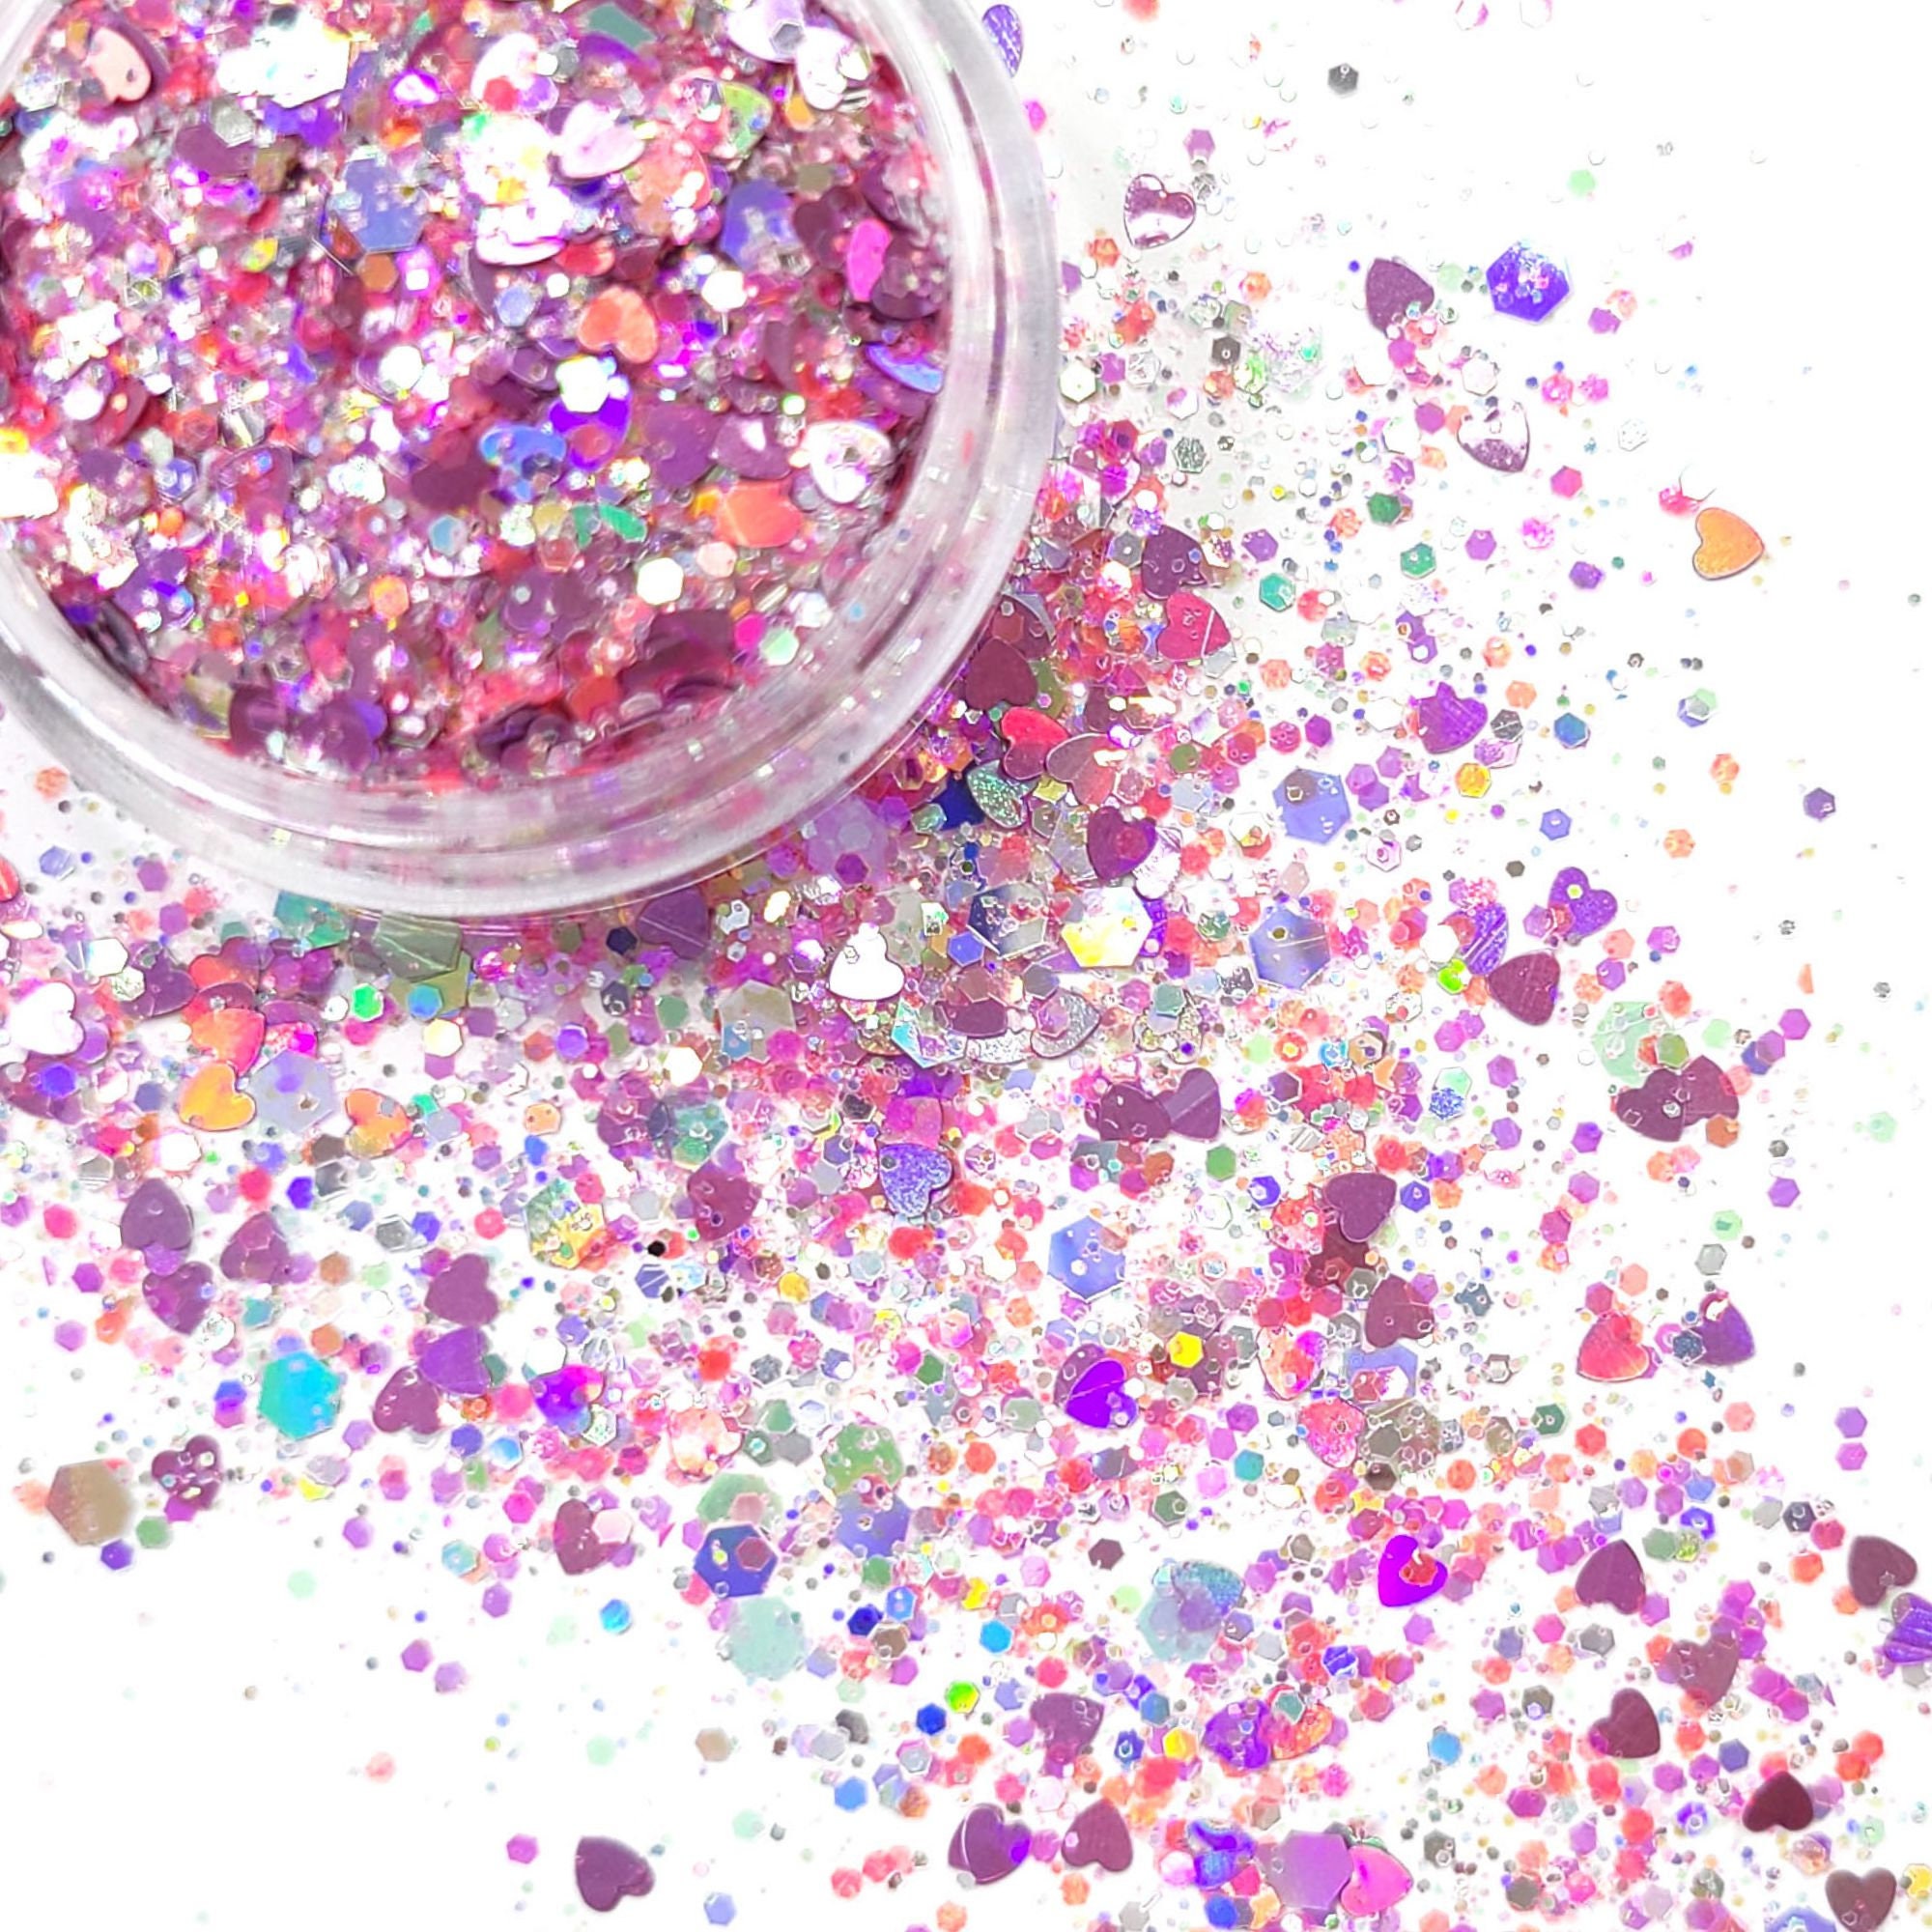 Red Chunky Glitter, Cheery Cherry Chunky Mix Holographic Glitter – The  Blank Pineapple